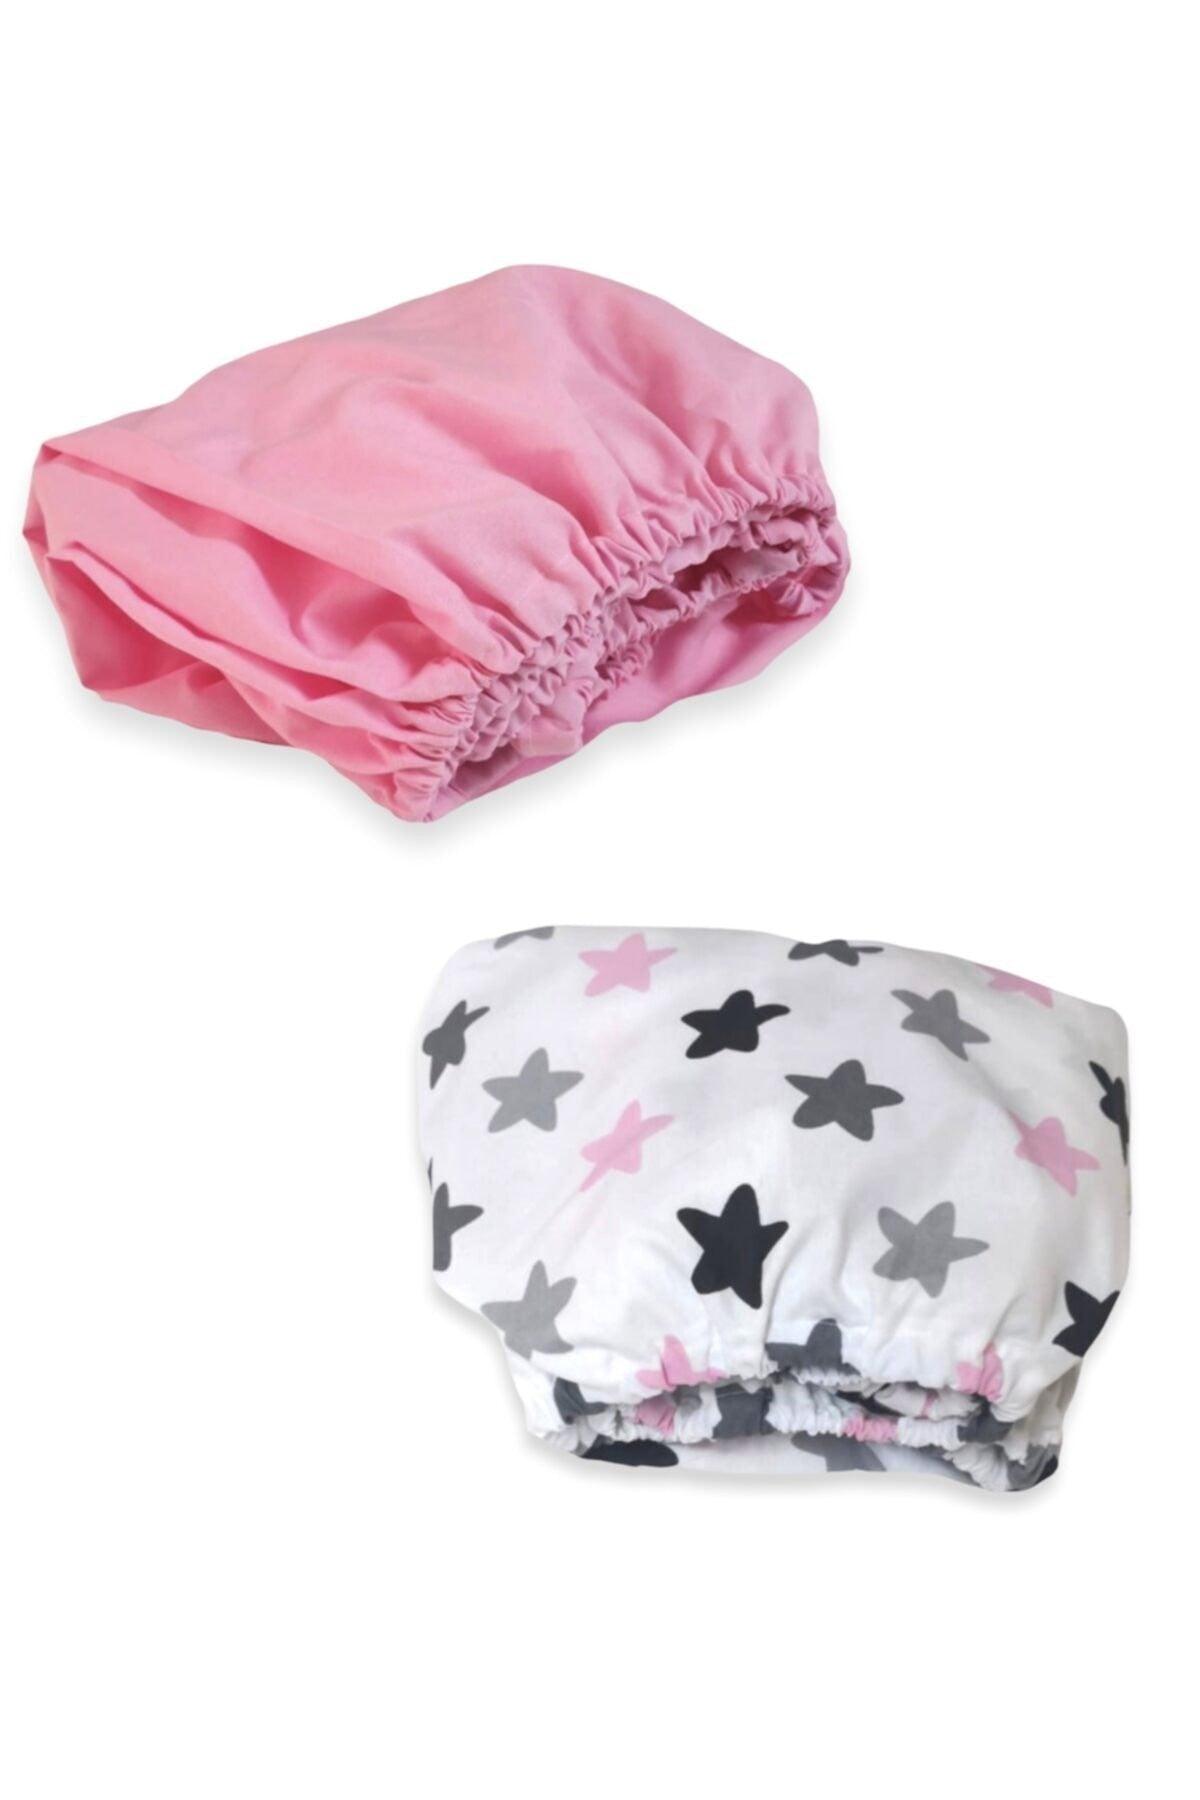 Cotton Kids Elastic Bed Sheet 120x200 (2 Pieces) Pink And Pink Gray Starry - Swordslife